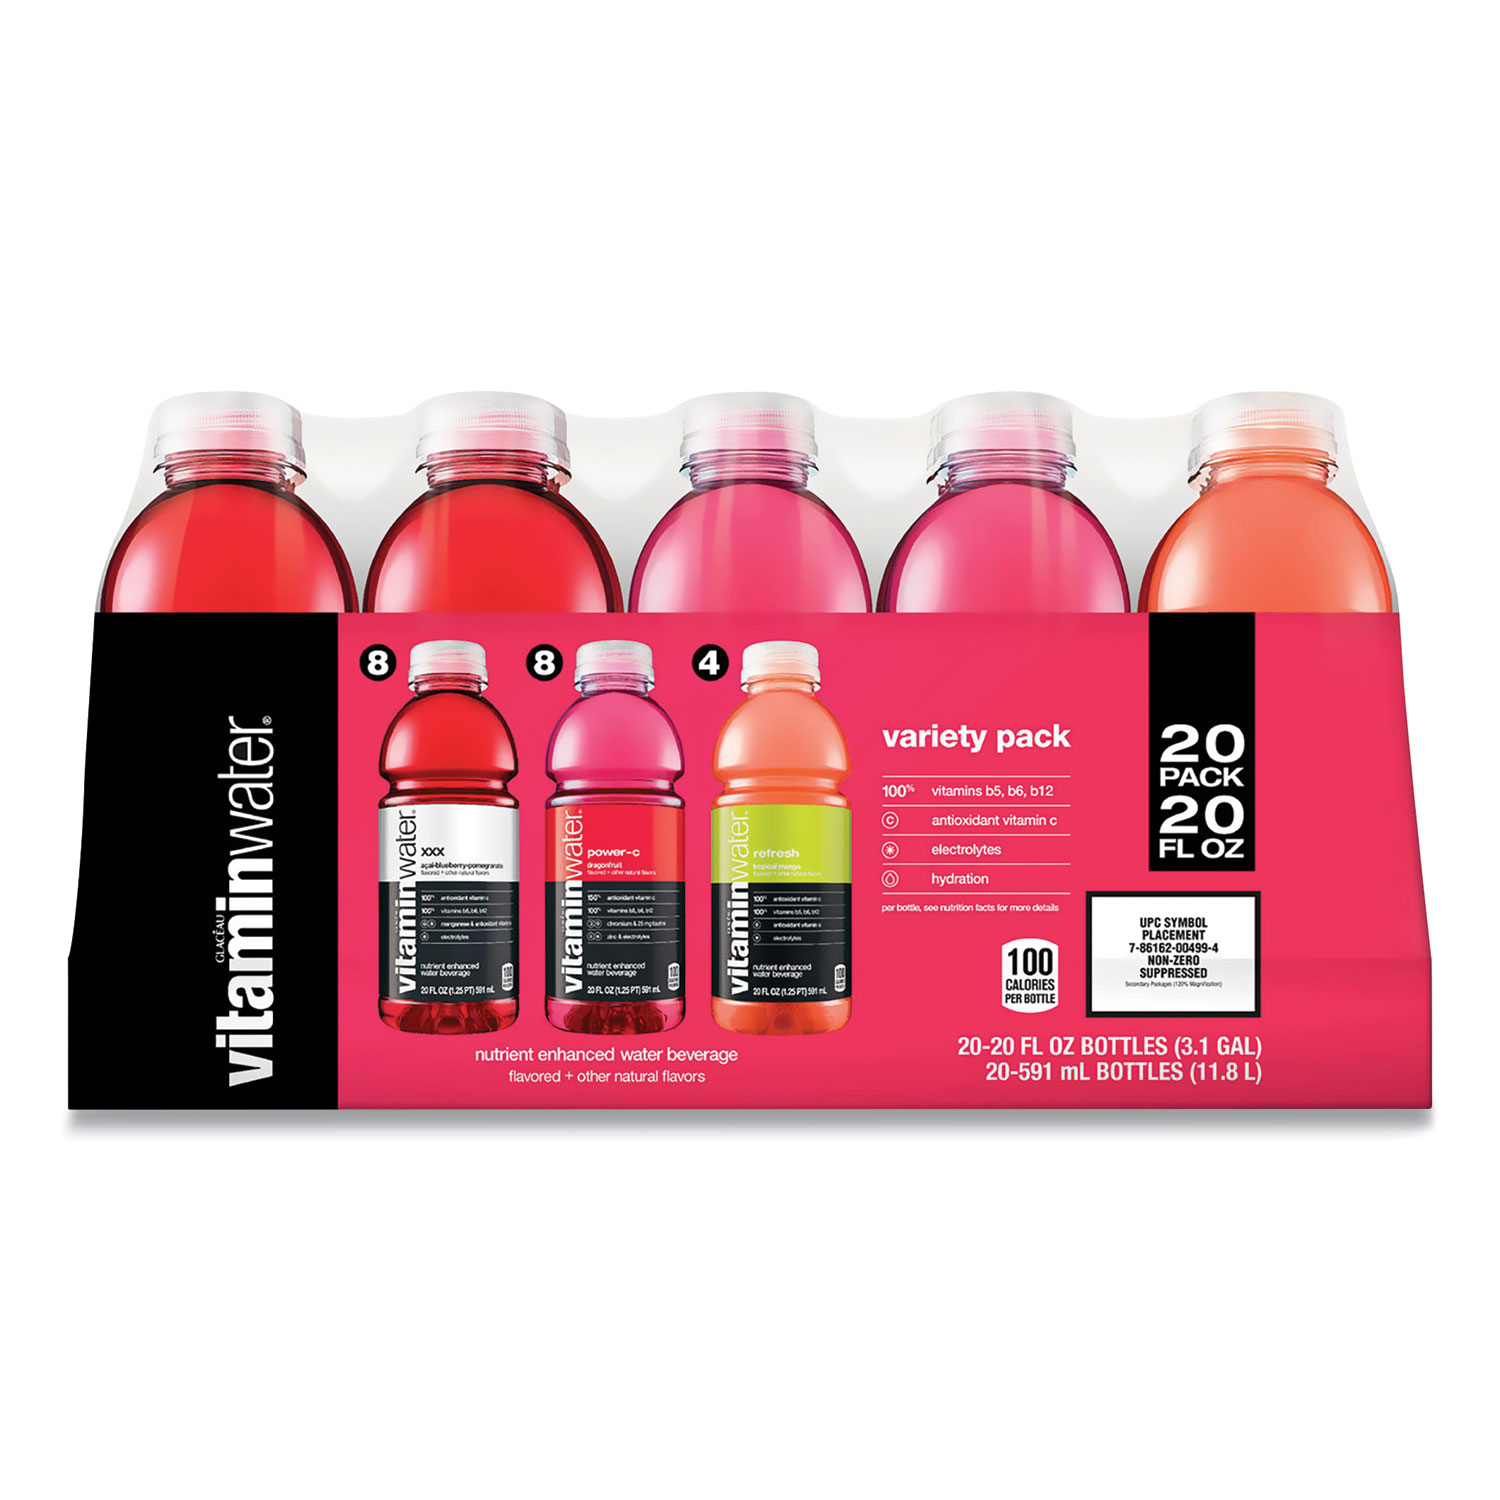  vitaminwater 00499 Nutrient Enhanced Water Beverage, Variety Pack, 20 oz Bottle, 20/Pack, Free Delivery in 1-4 Business Days (GRR22001103) 